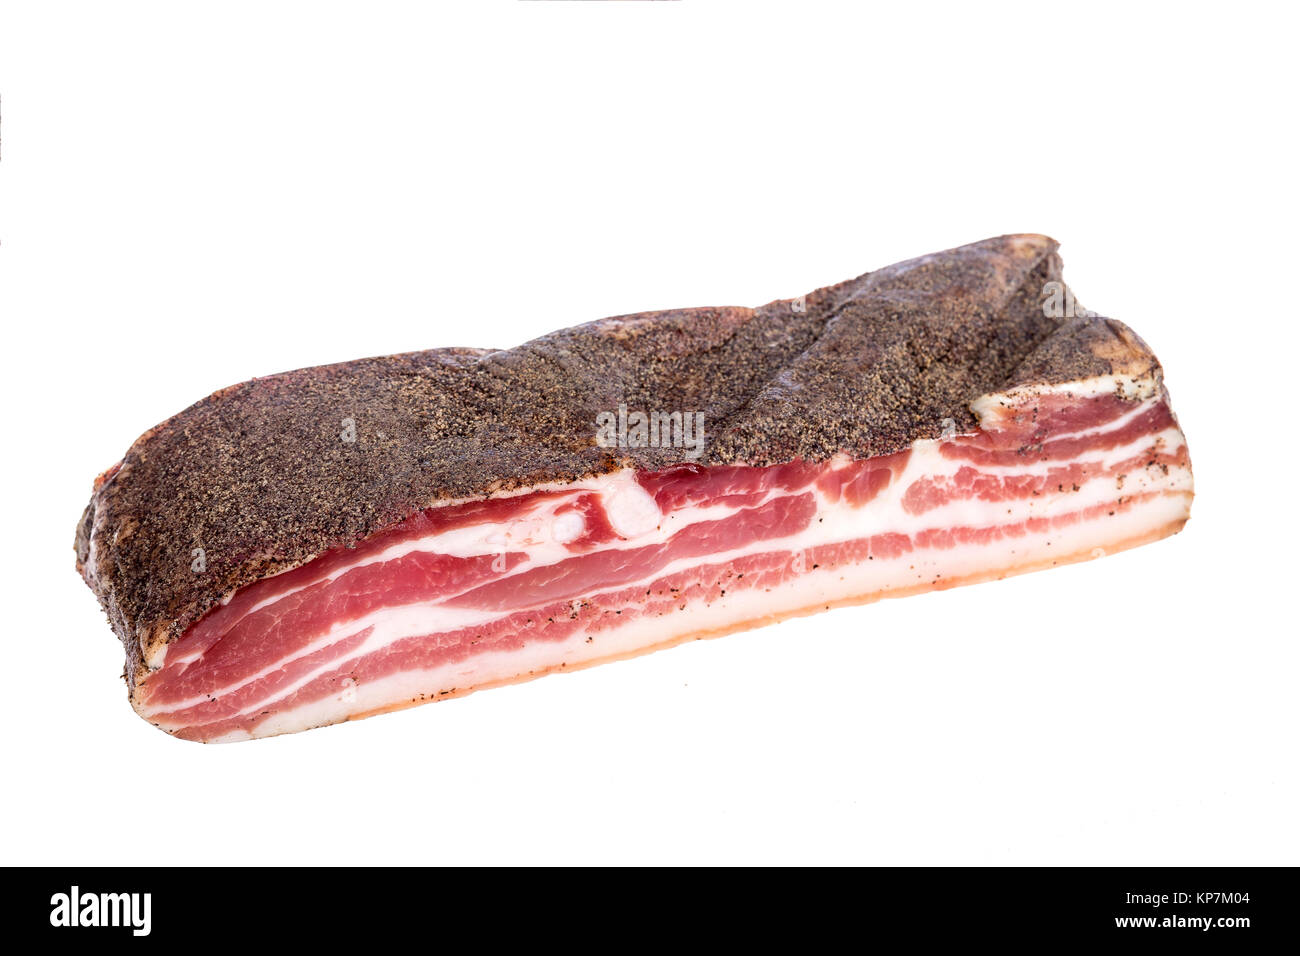 Corsican traditional delicatess smoked piece of pork or boar belly on a white background Stock Photo